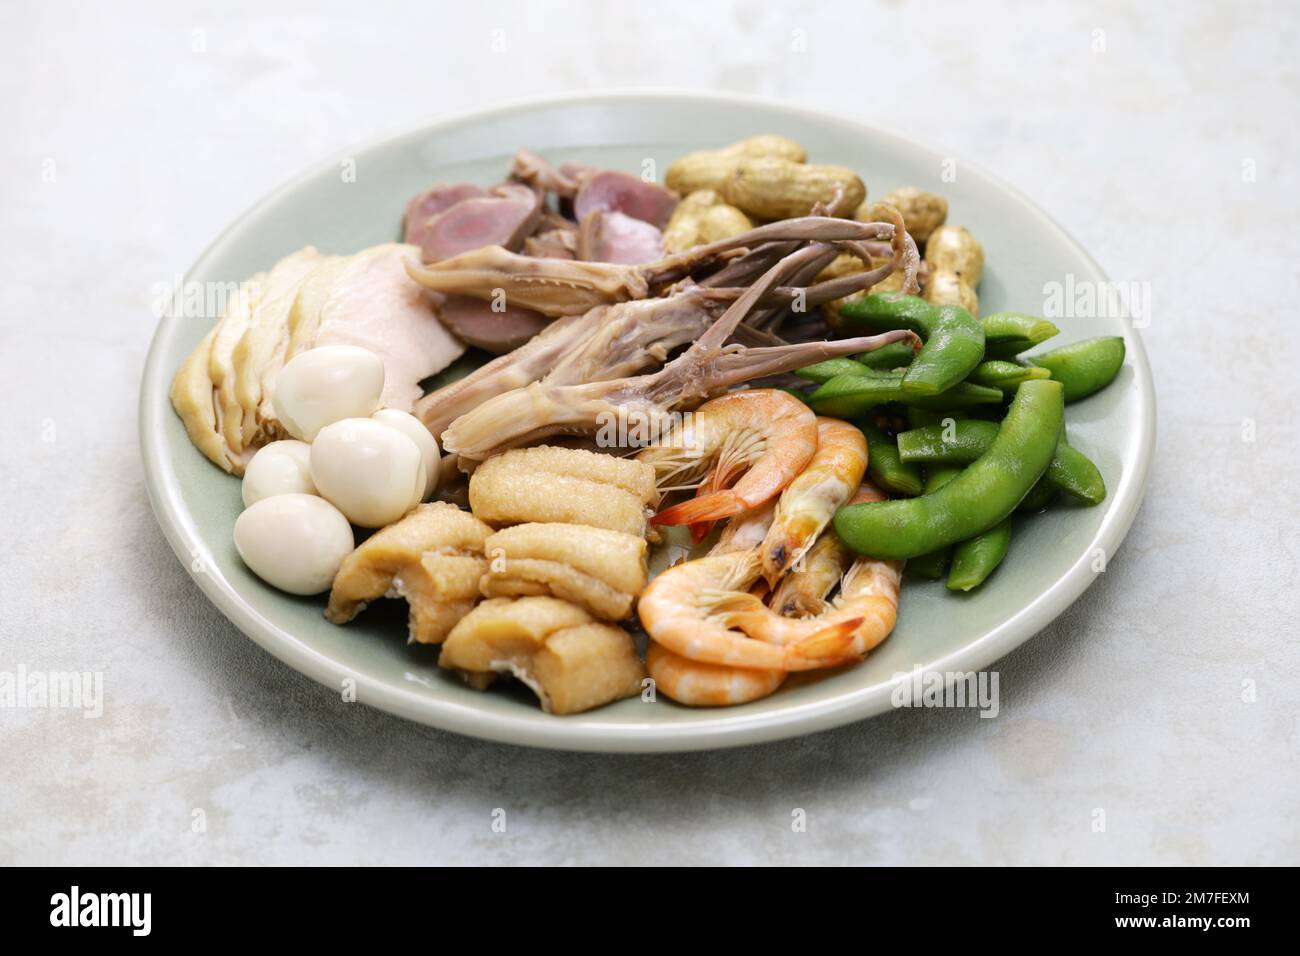 Traditional Shanghai summer cuisine. the meat and vegetables were soaked in aged Chinese wine lees brine. Stock Photo